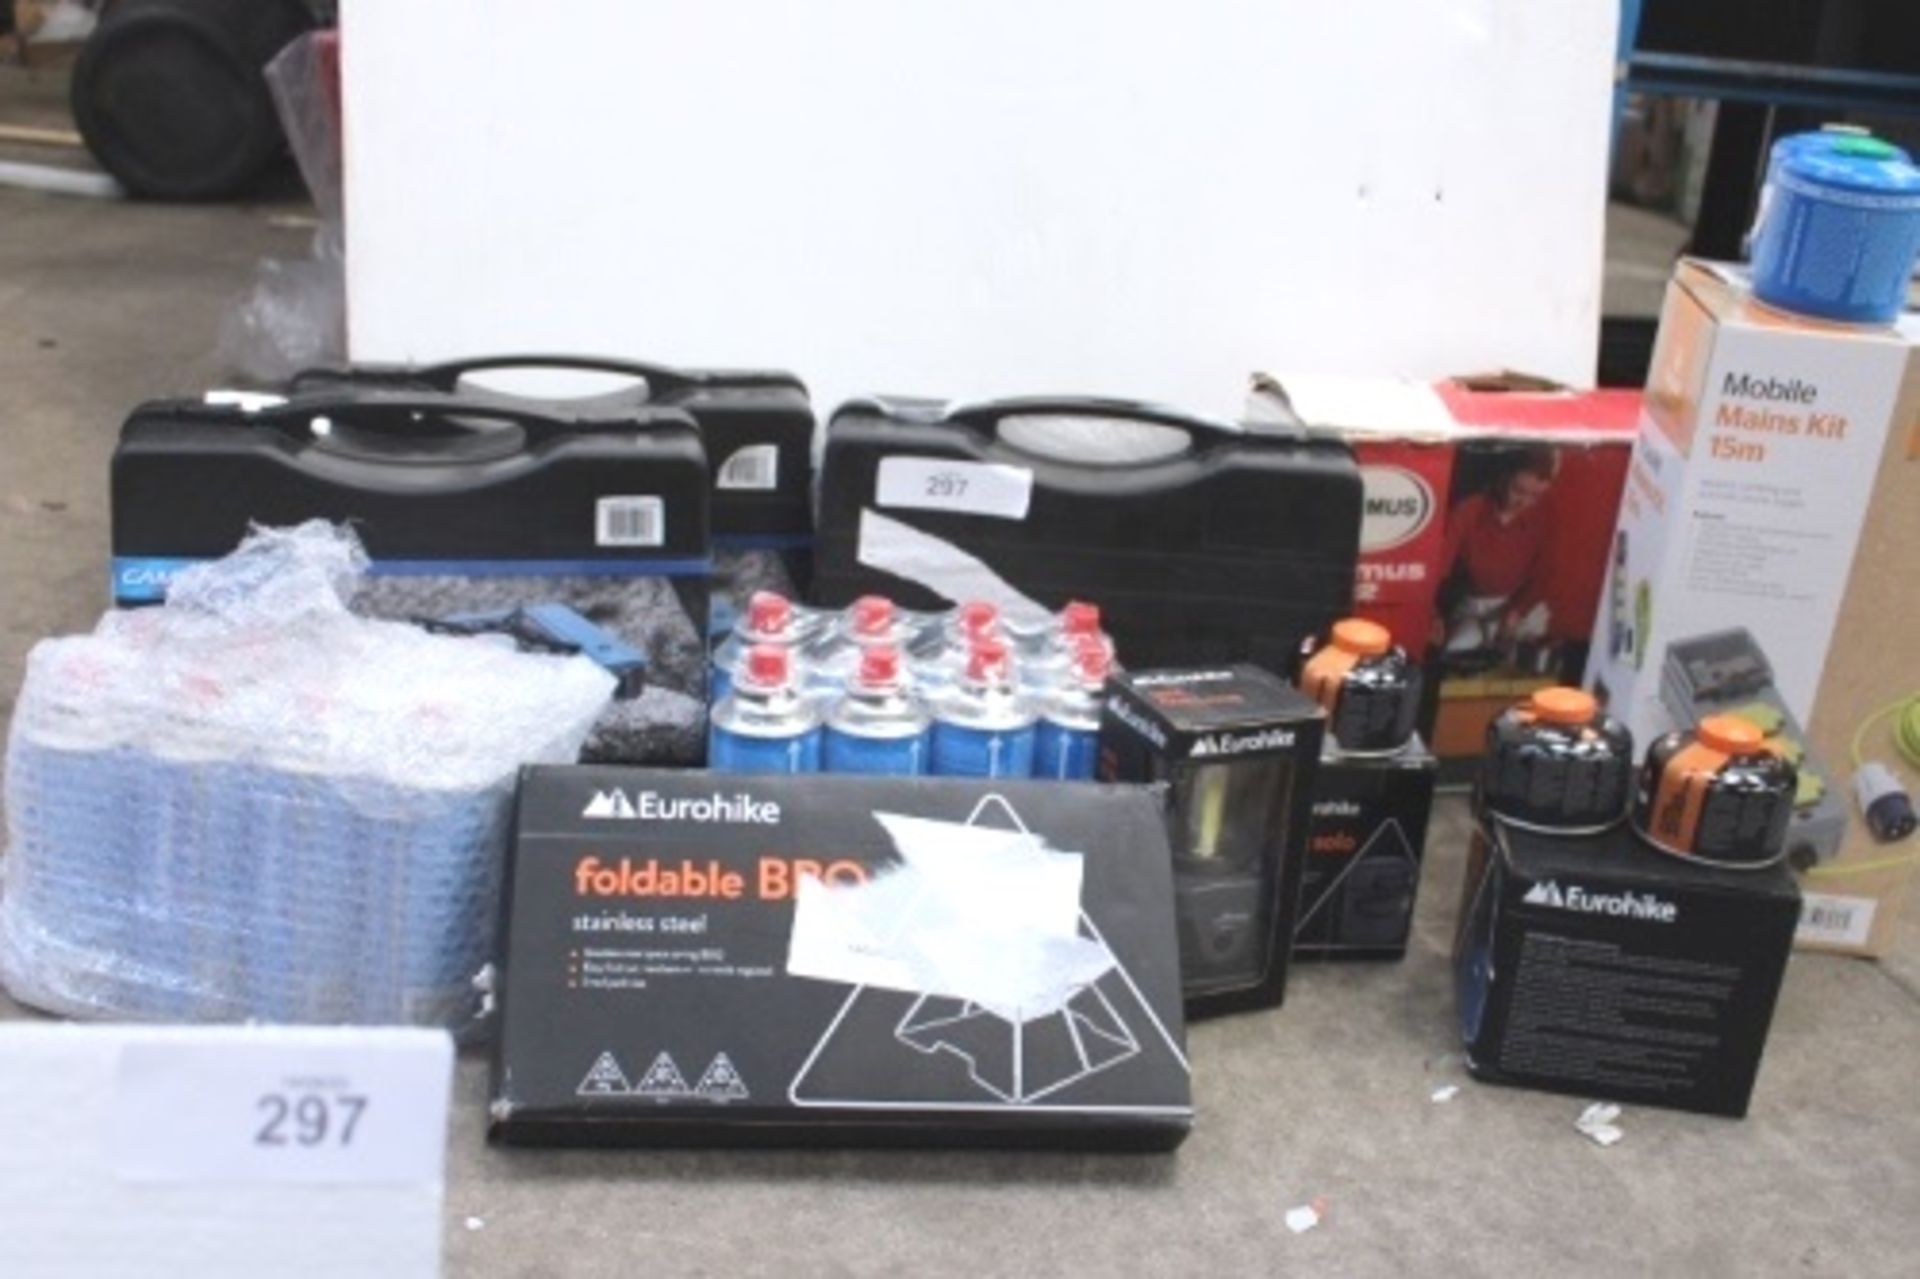 A quantity of camping items including Eurohike folding BBQ, kettle, cob lantern, Solo cook set, 2